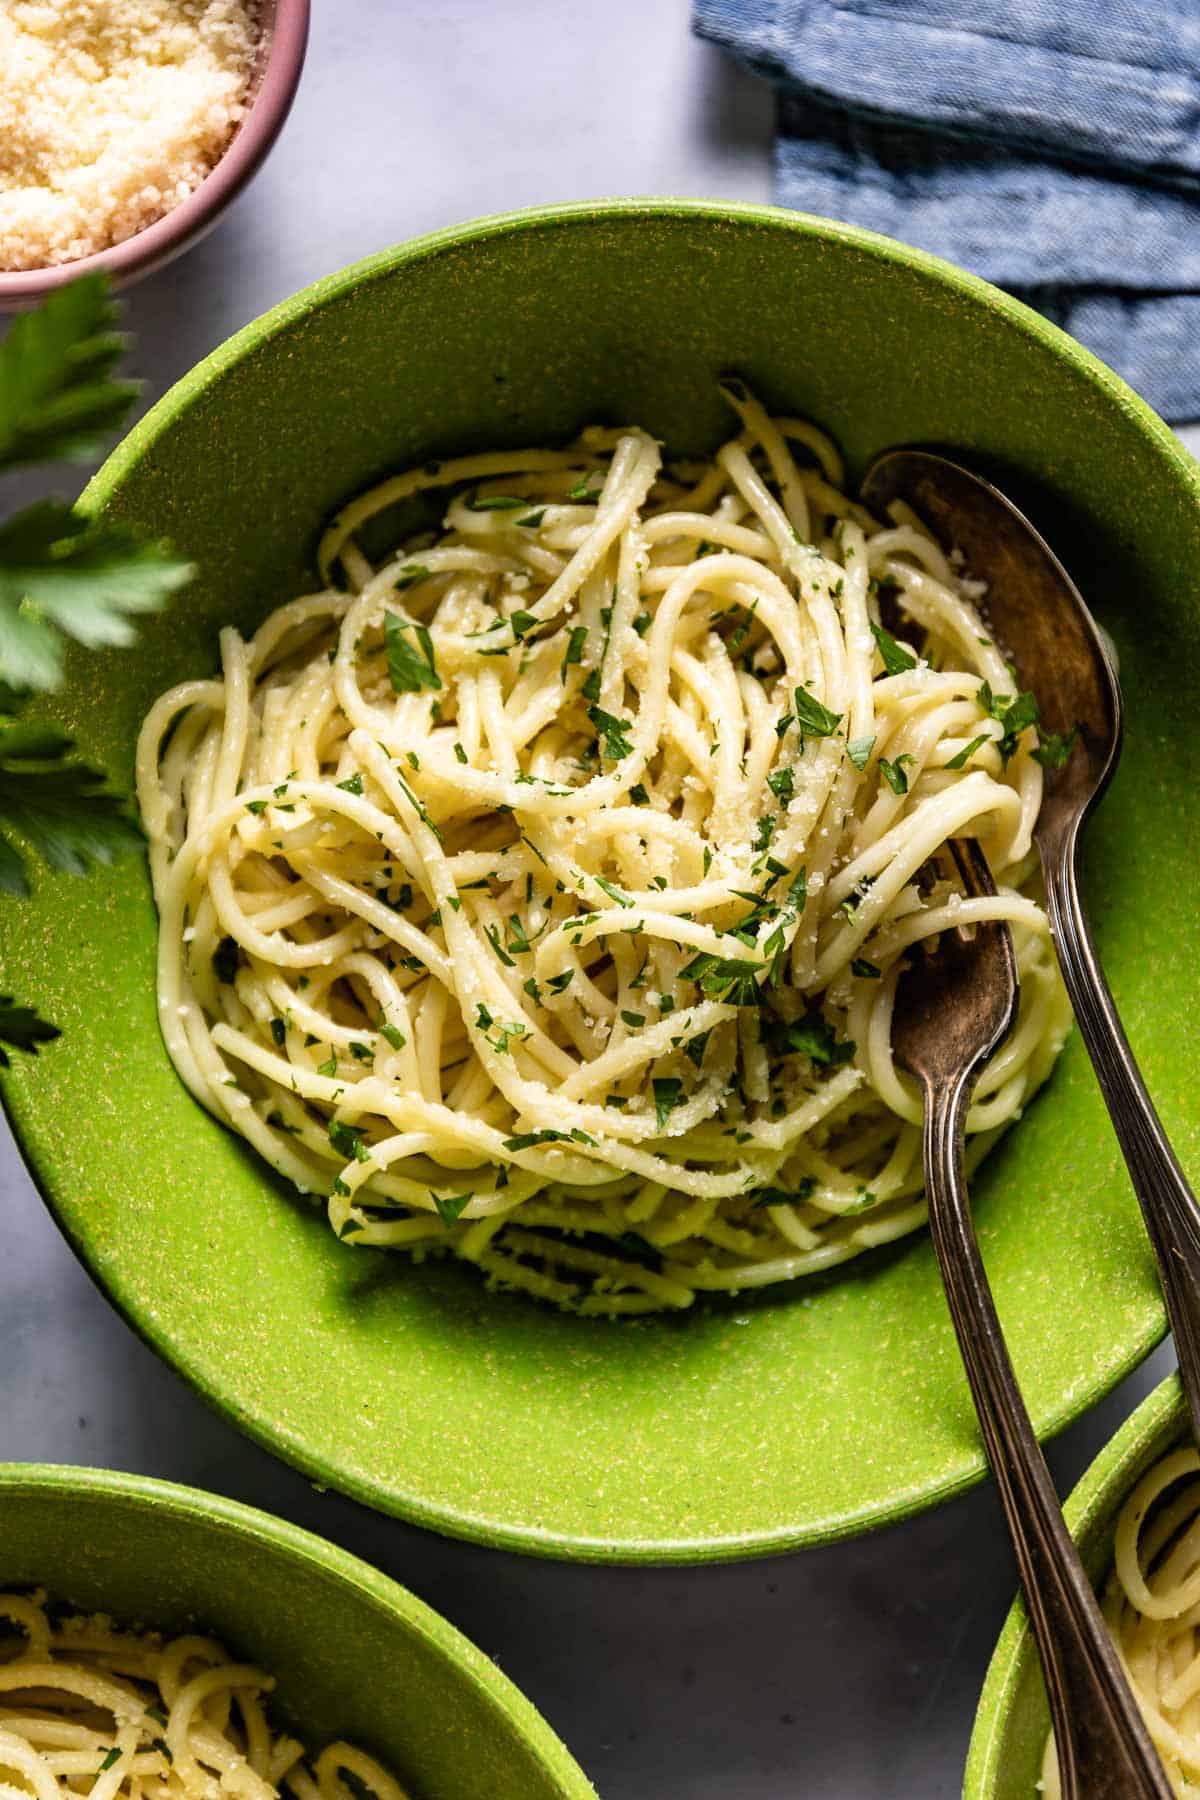 Buttered pasta in a bowl garnished with parsley and parmesan cheese.